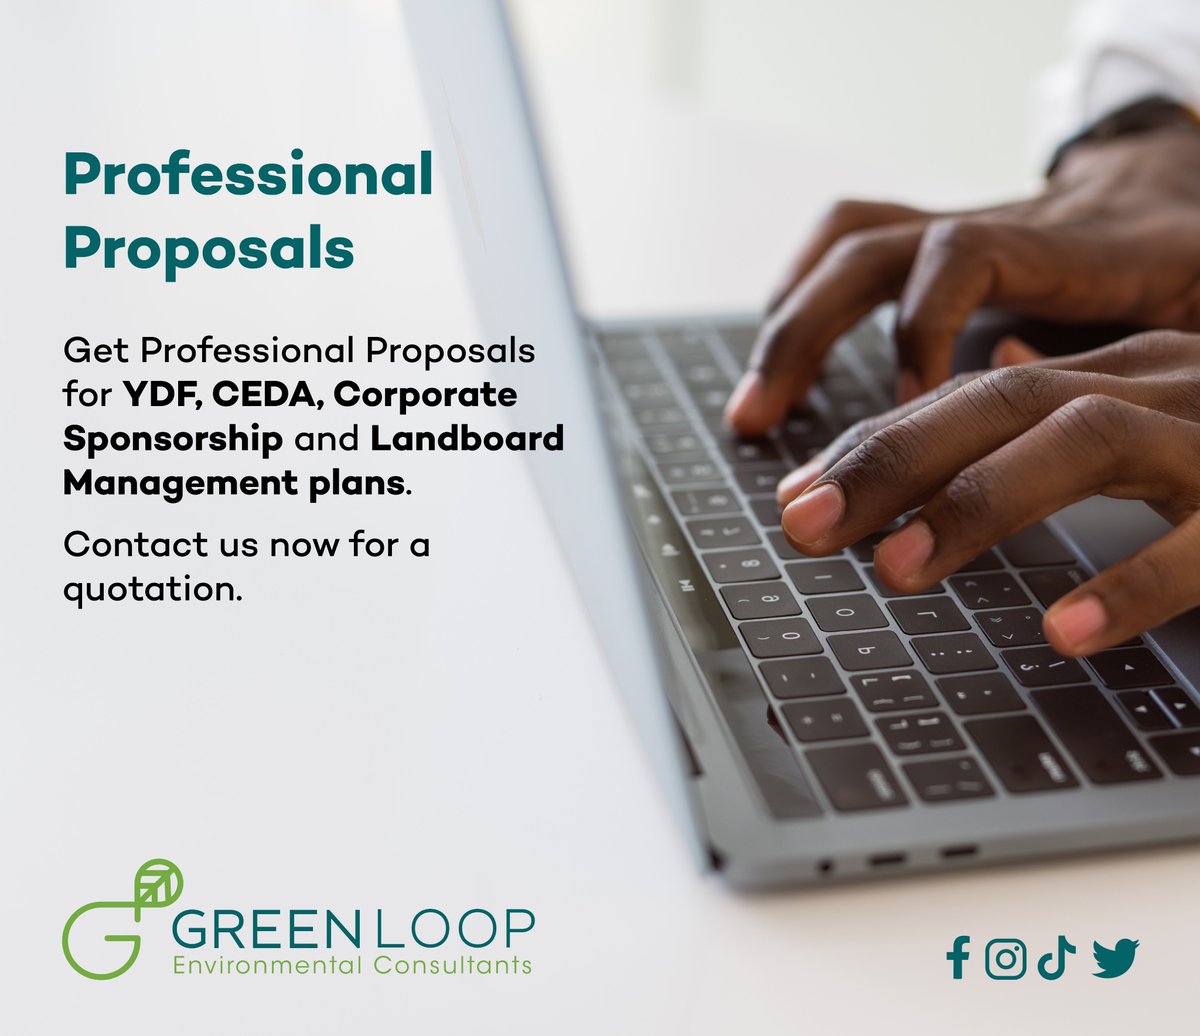 EXCITING NEWS 🥳🤩 Green Loop now offers professional proposal writing. Contact us for all your YDF, CEDA, Corporate Sponsorship and Landboard Management plans. We are ready to assist you.

#greenloopbw #writersblock #goinggreen #intheloop #ilovebotswana #biodegradable #newyear